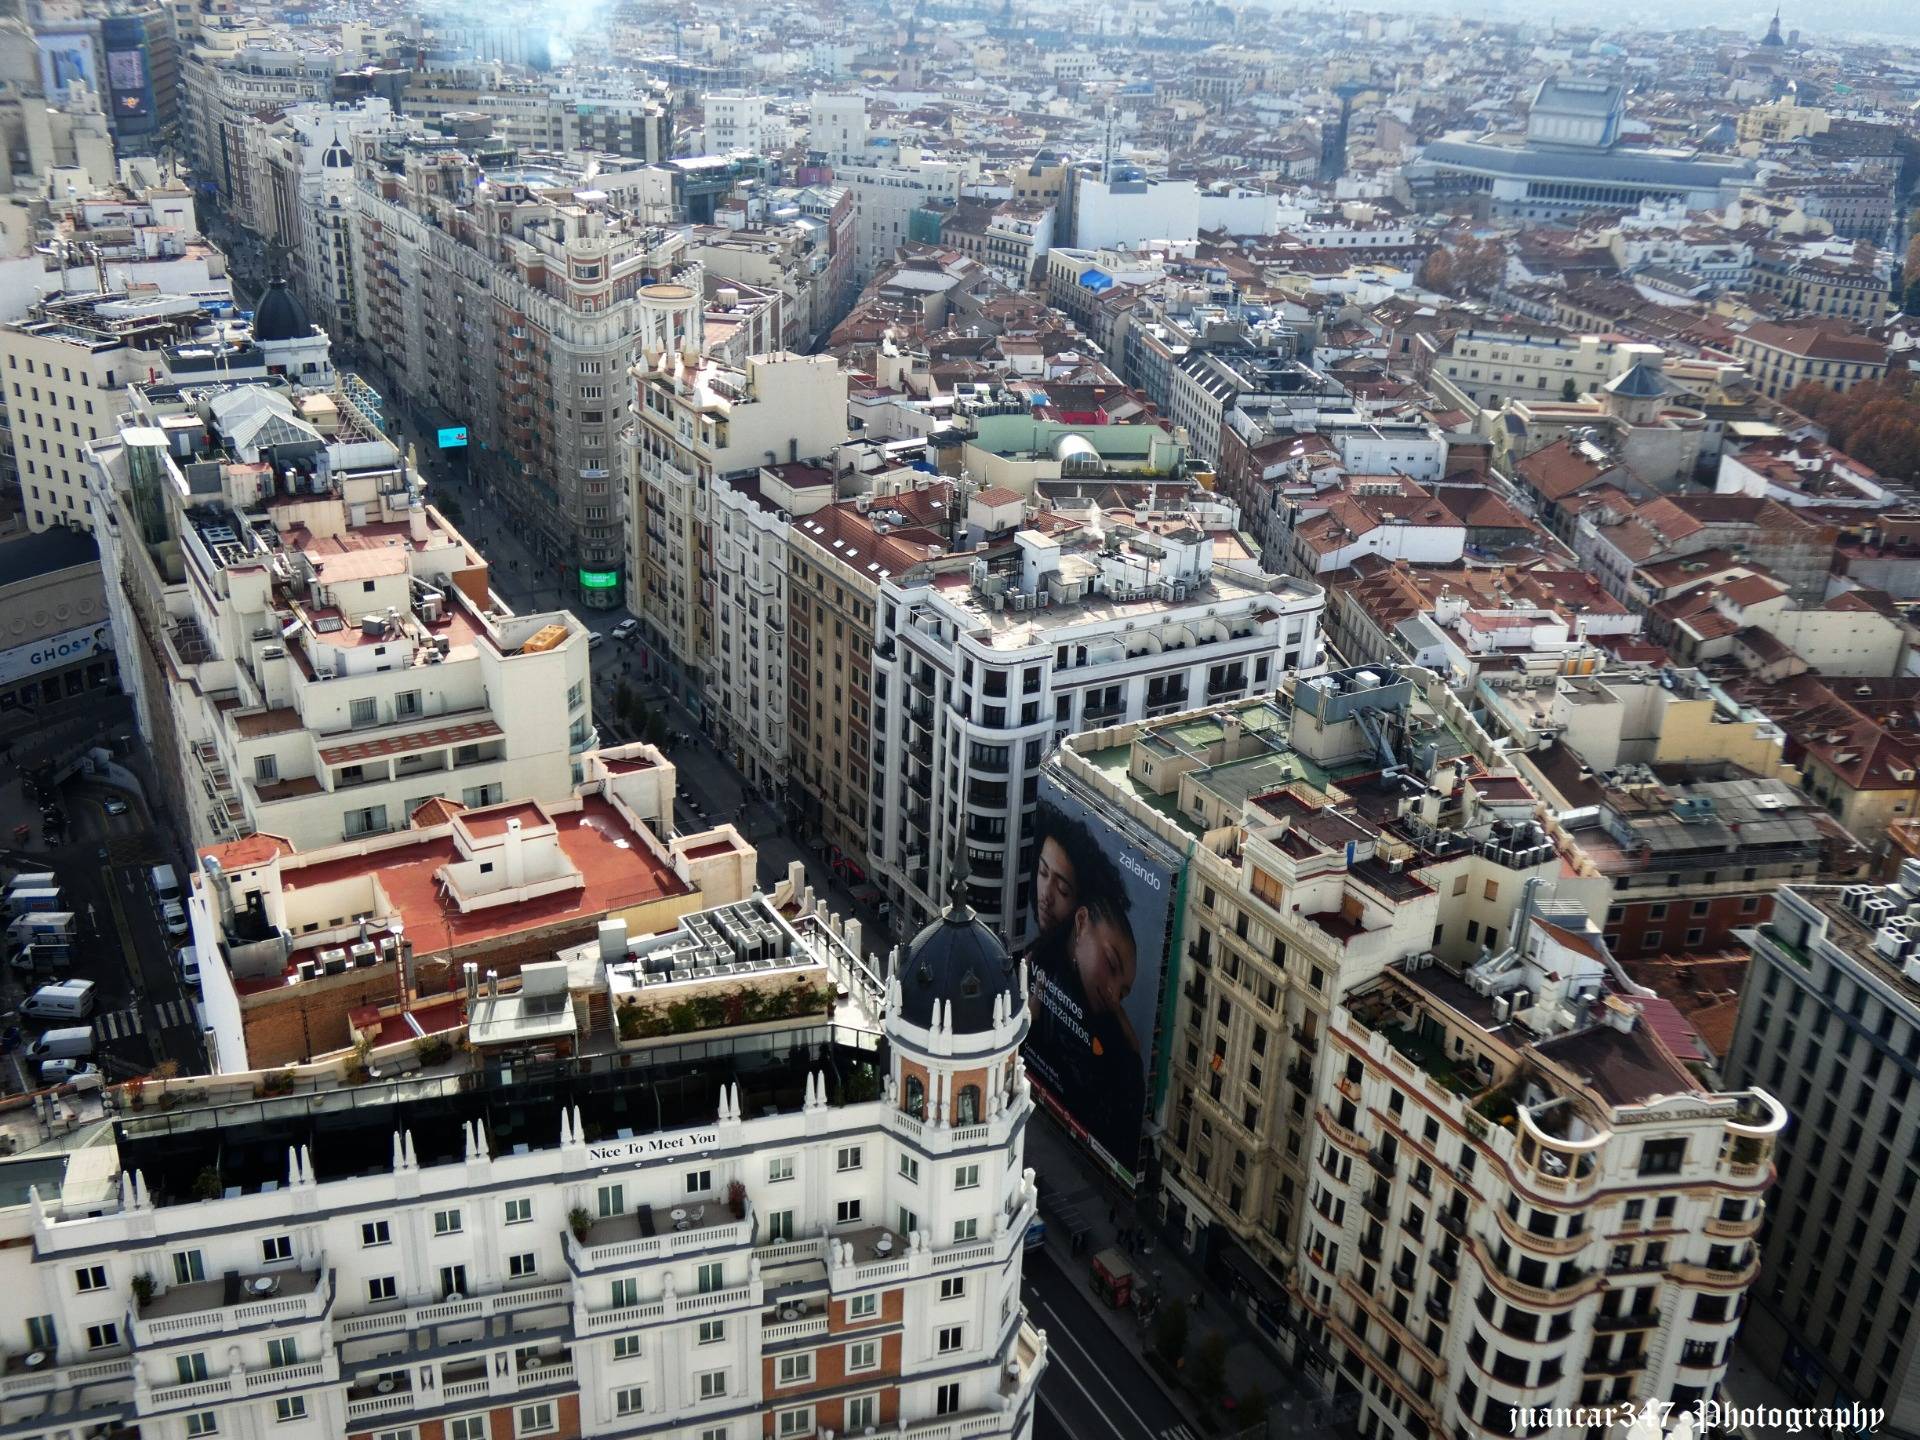 Overview of the popular Gran Vía street and its modernist architecture